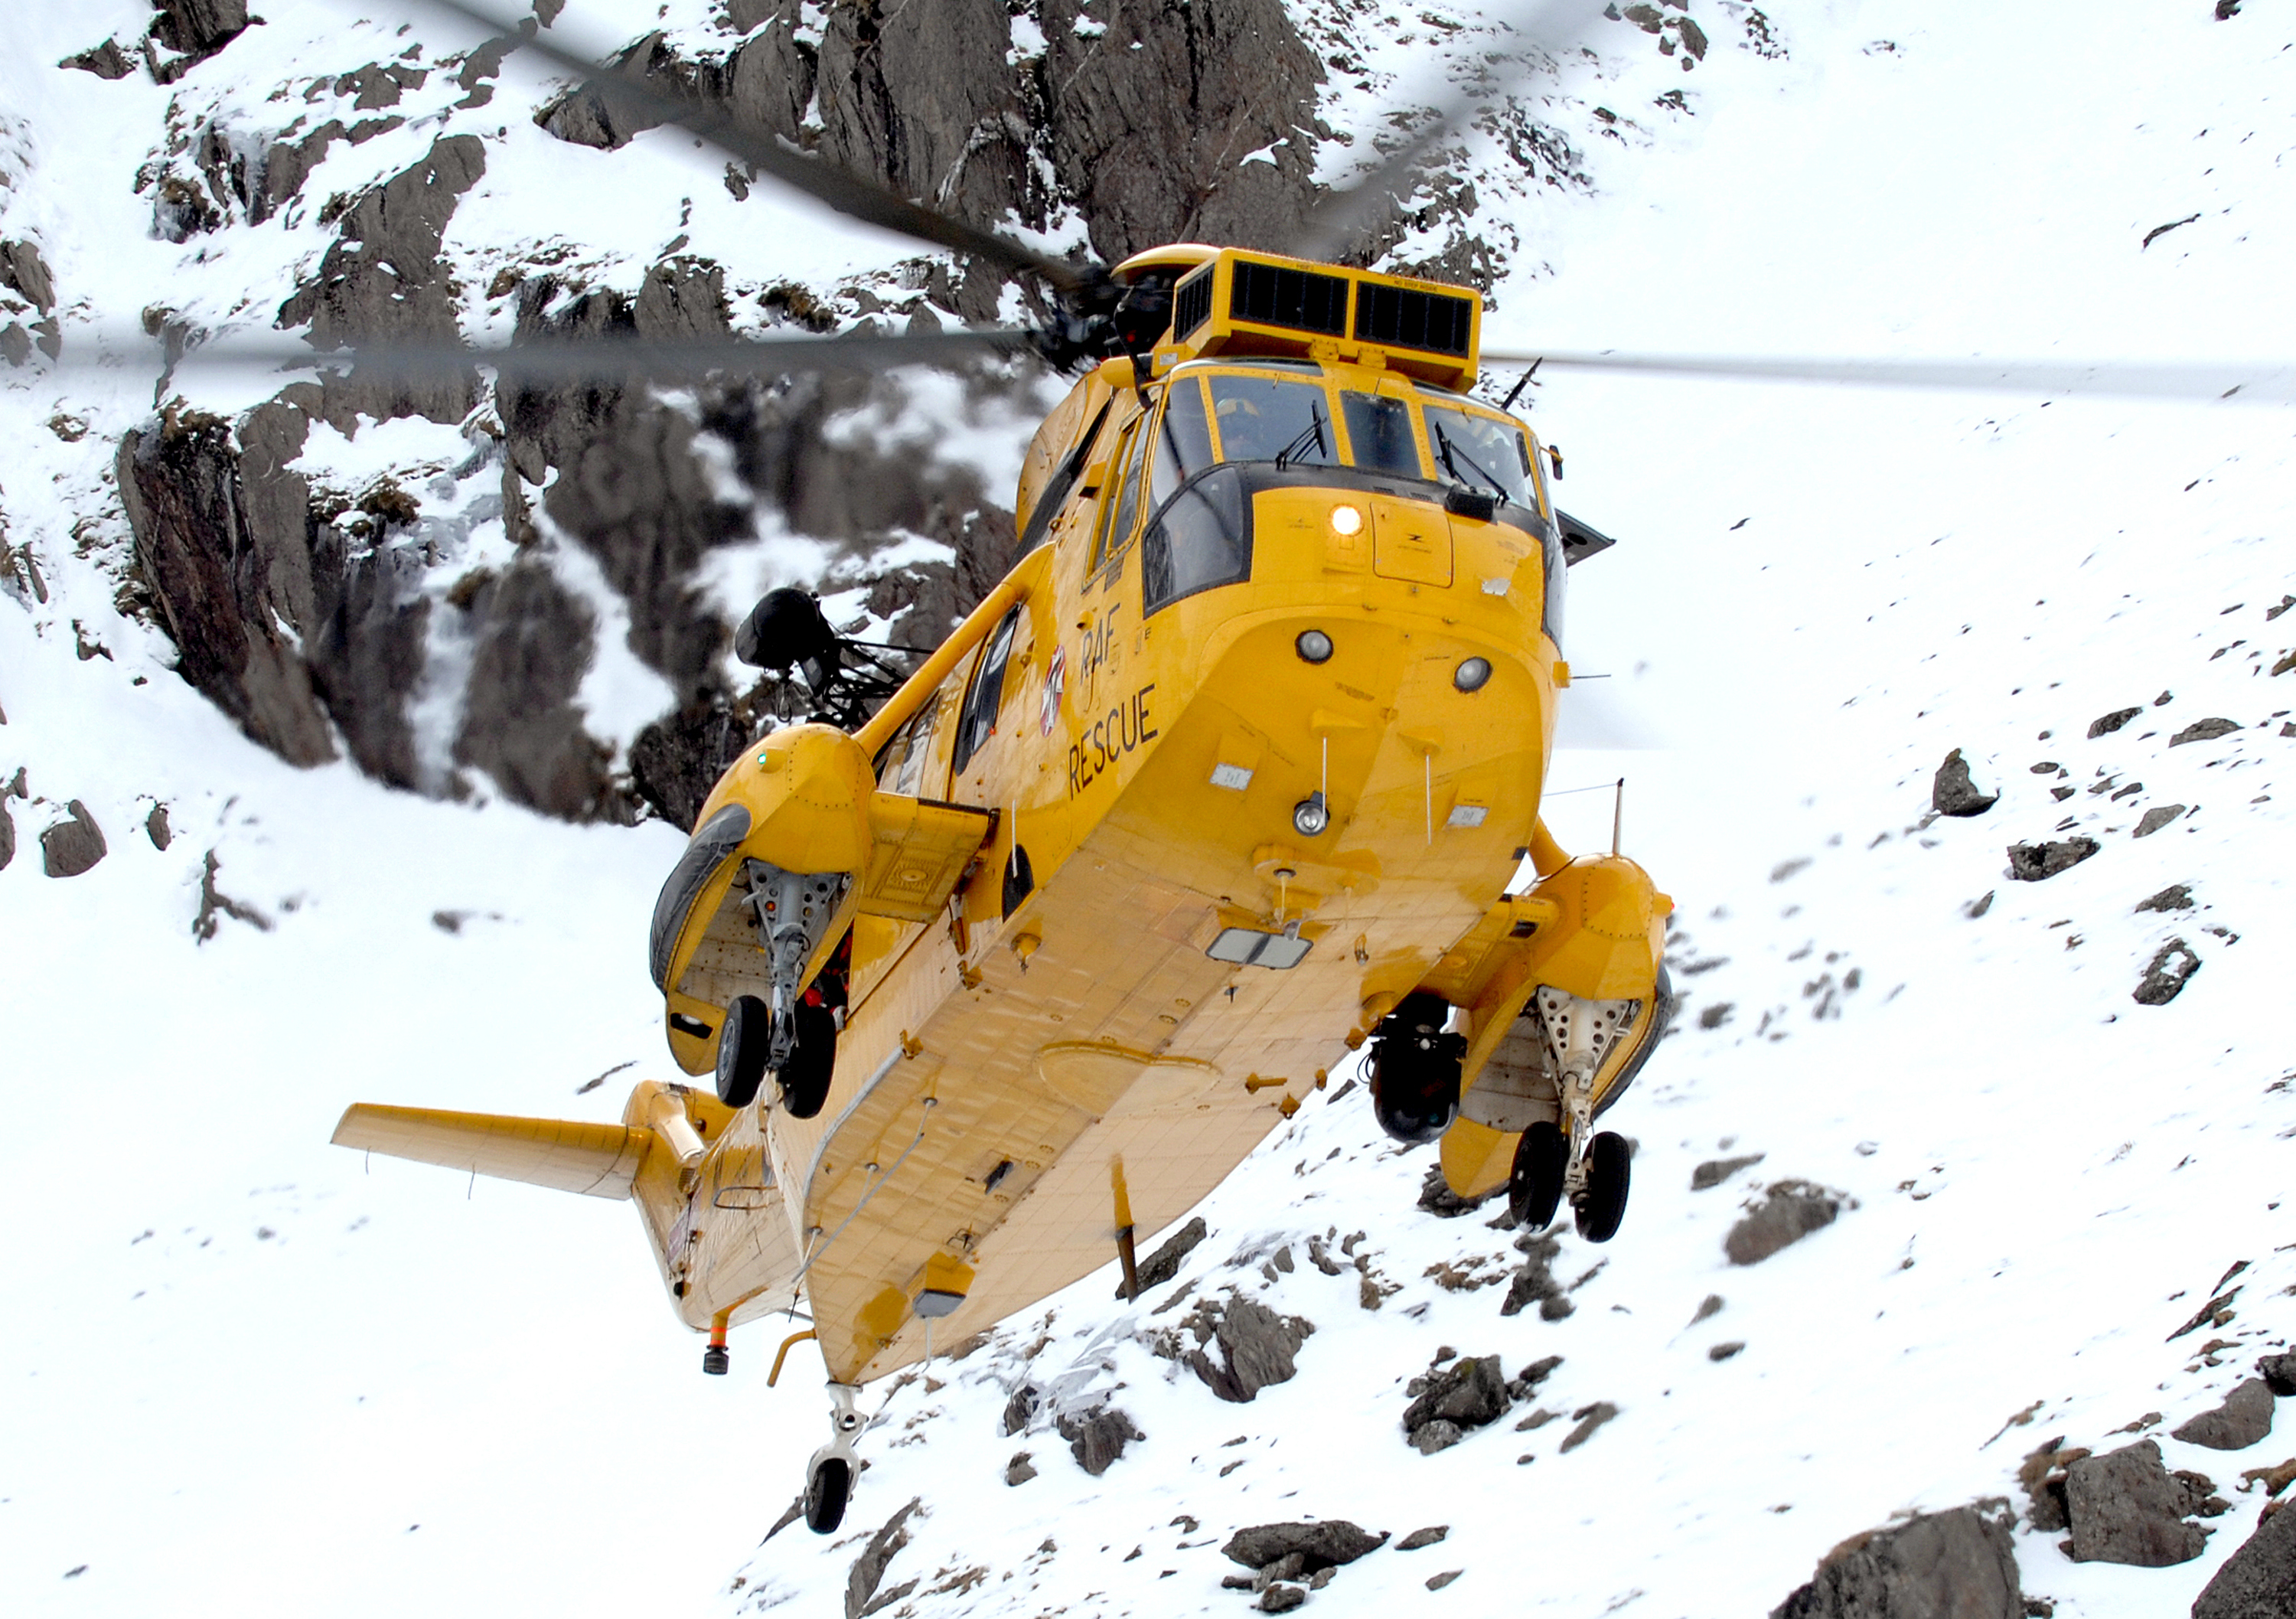 Royal Air Force Search and Rescue (SAR) Sea King in Snowdonia, Wales MOD 45152357